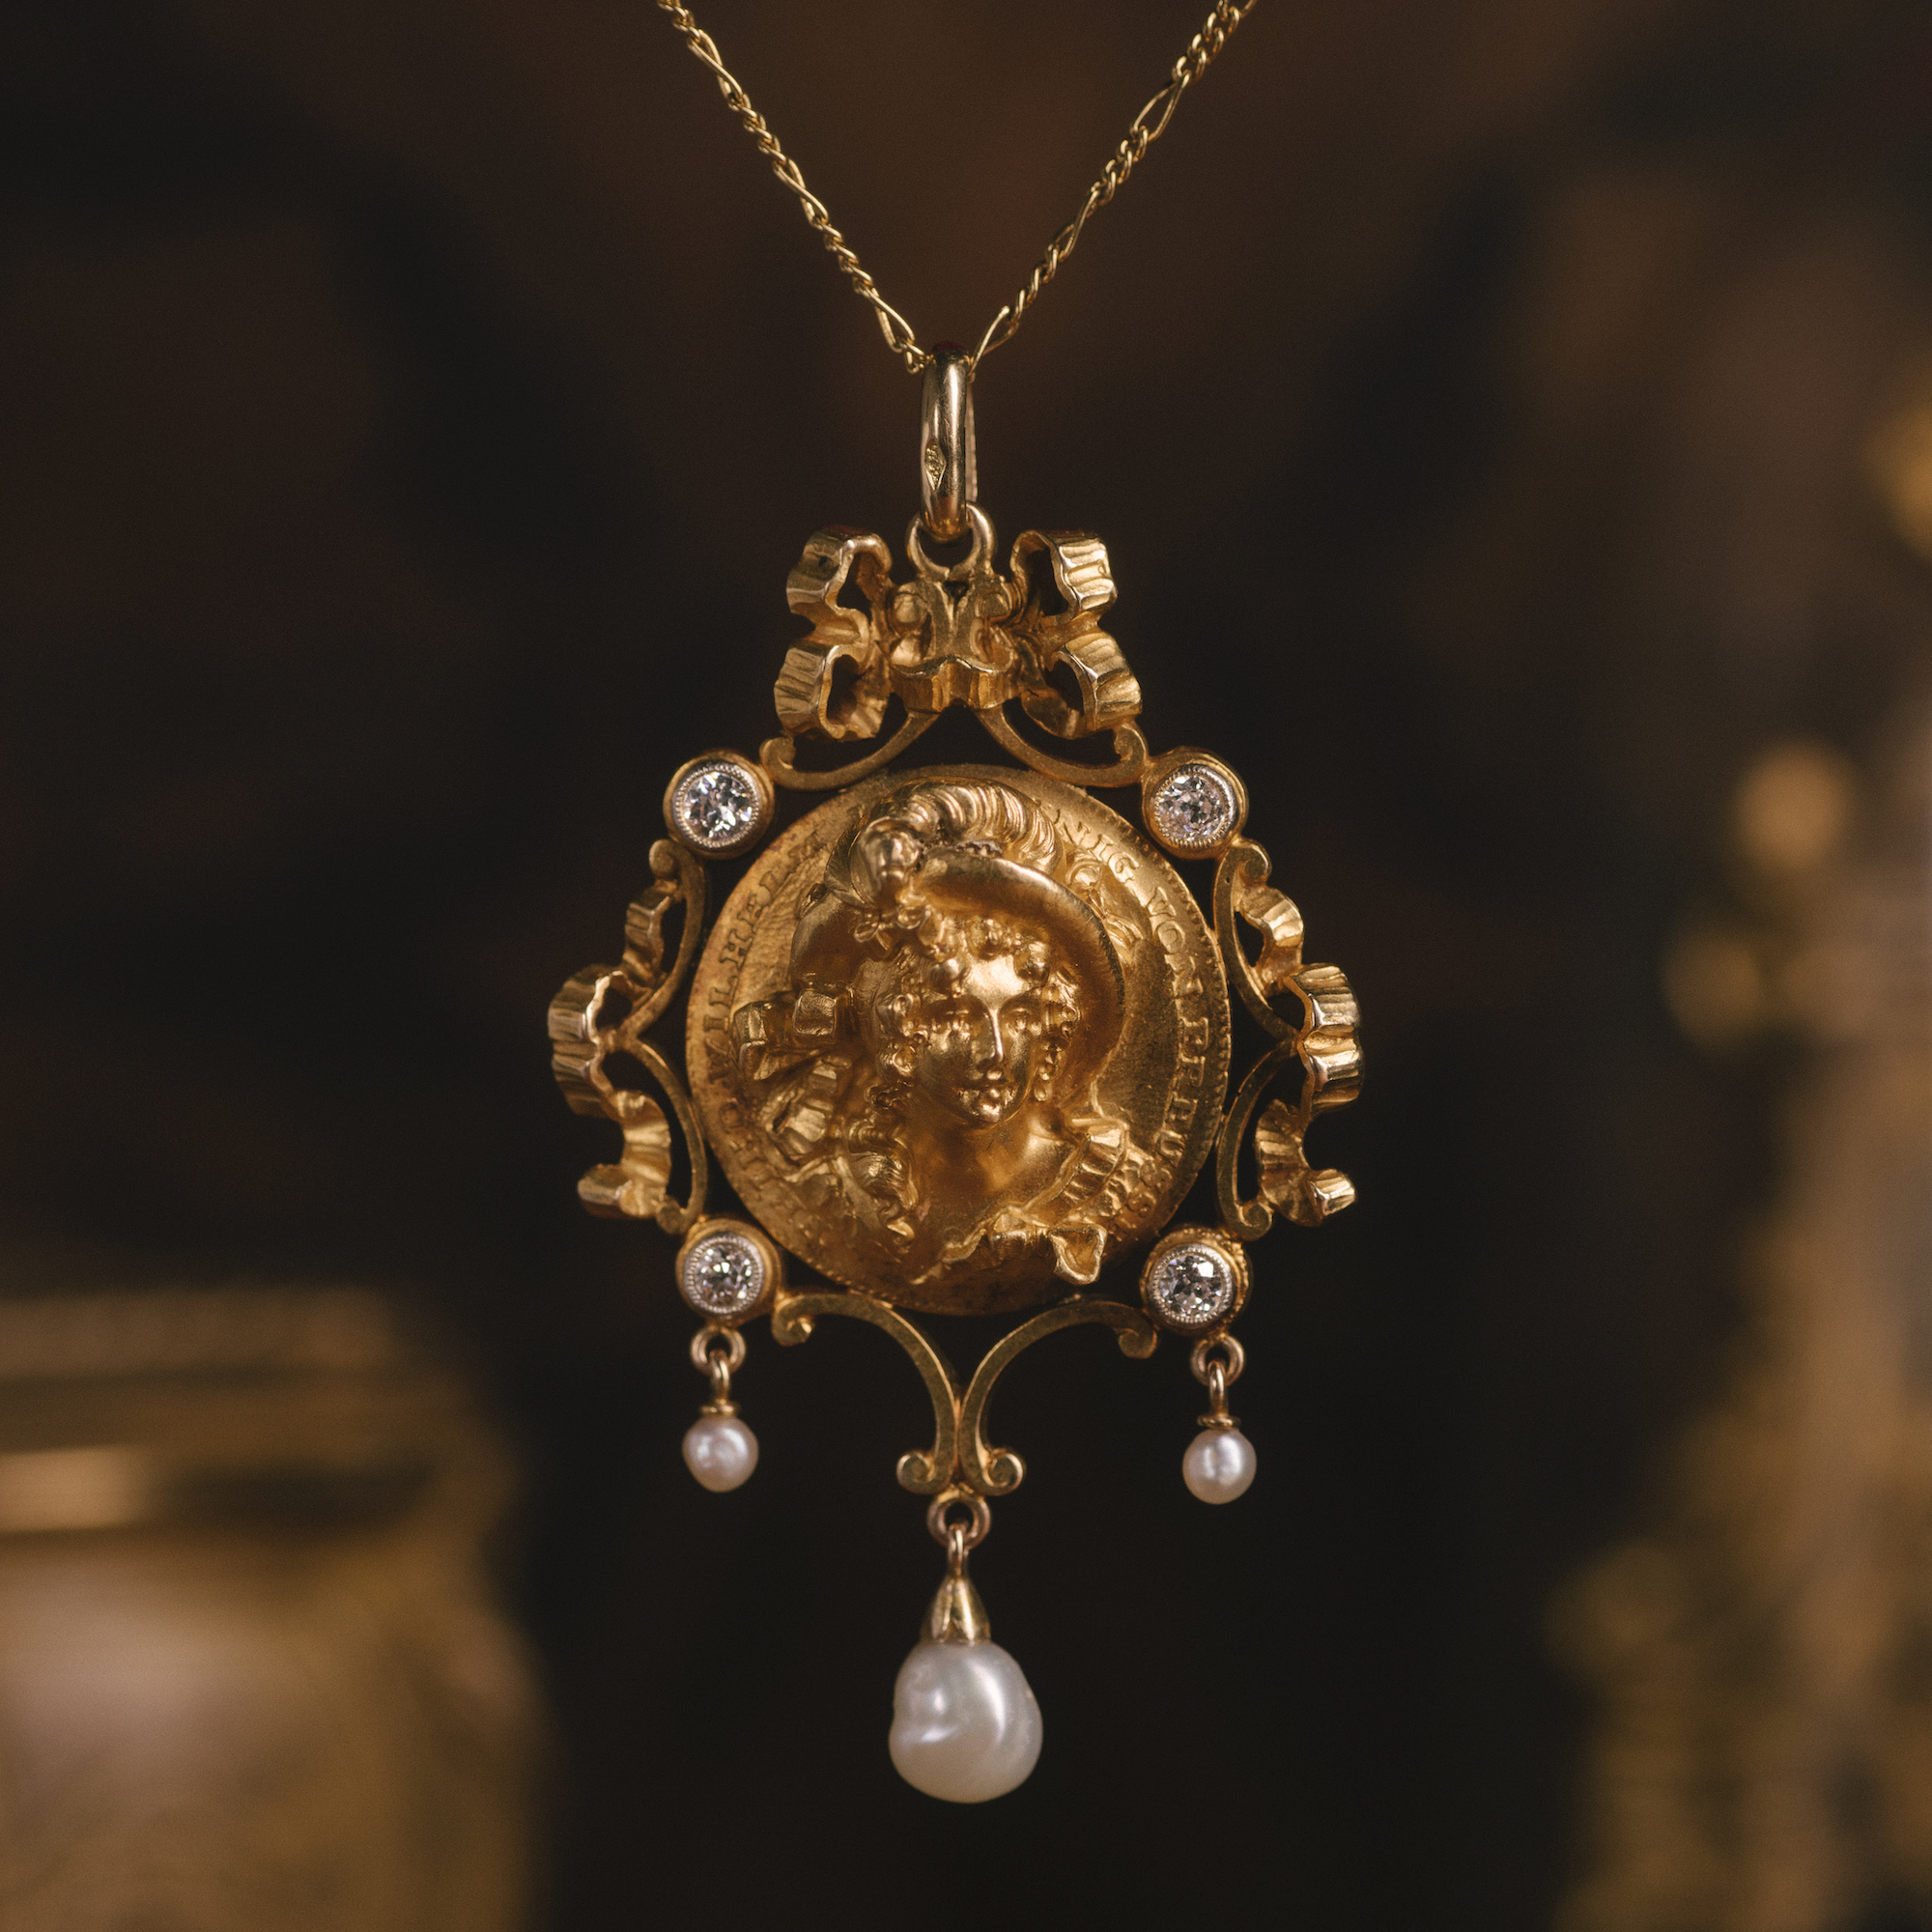 Rare Pendant Made of a Frederick d'or Coin From 1799, Around 1900